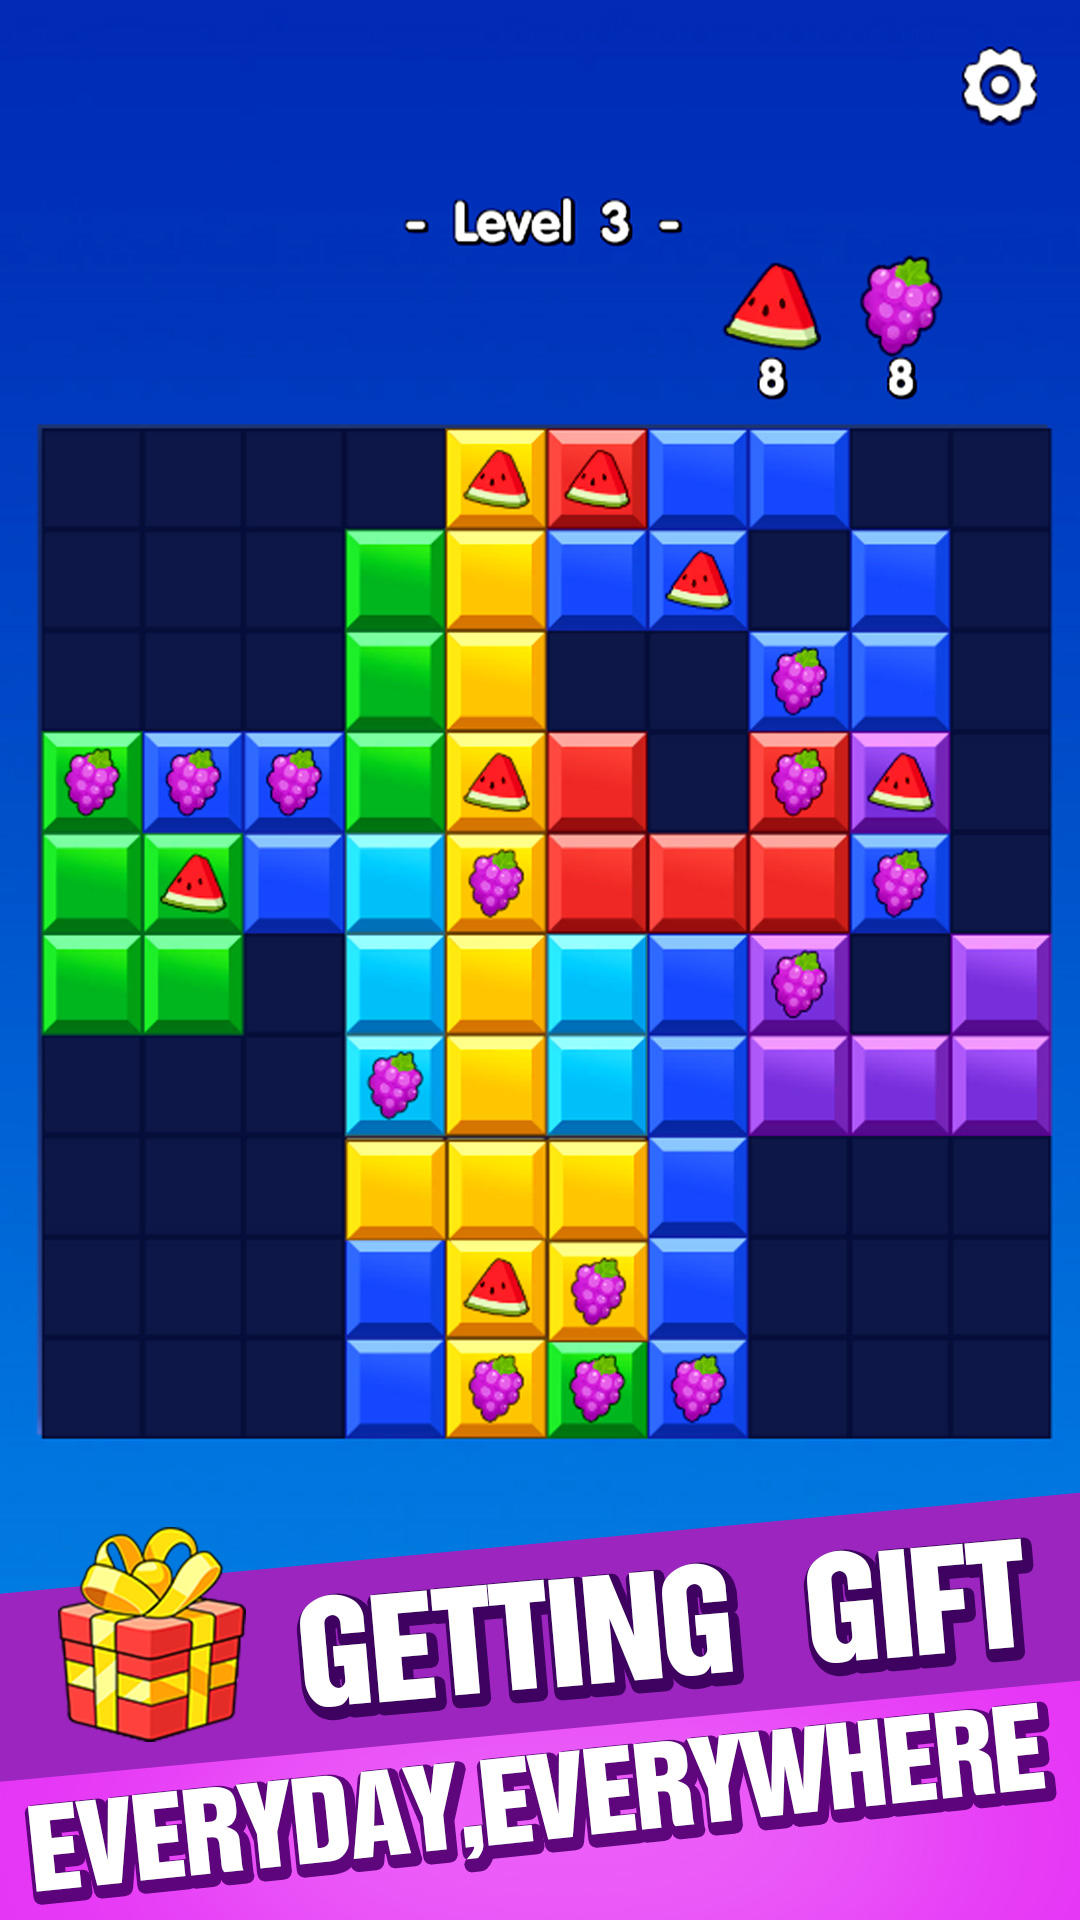 Cube Block: Classic Puzzle Game::Appstore for Android